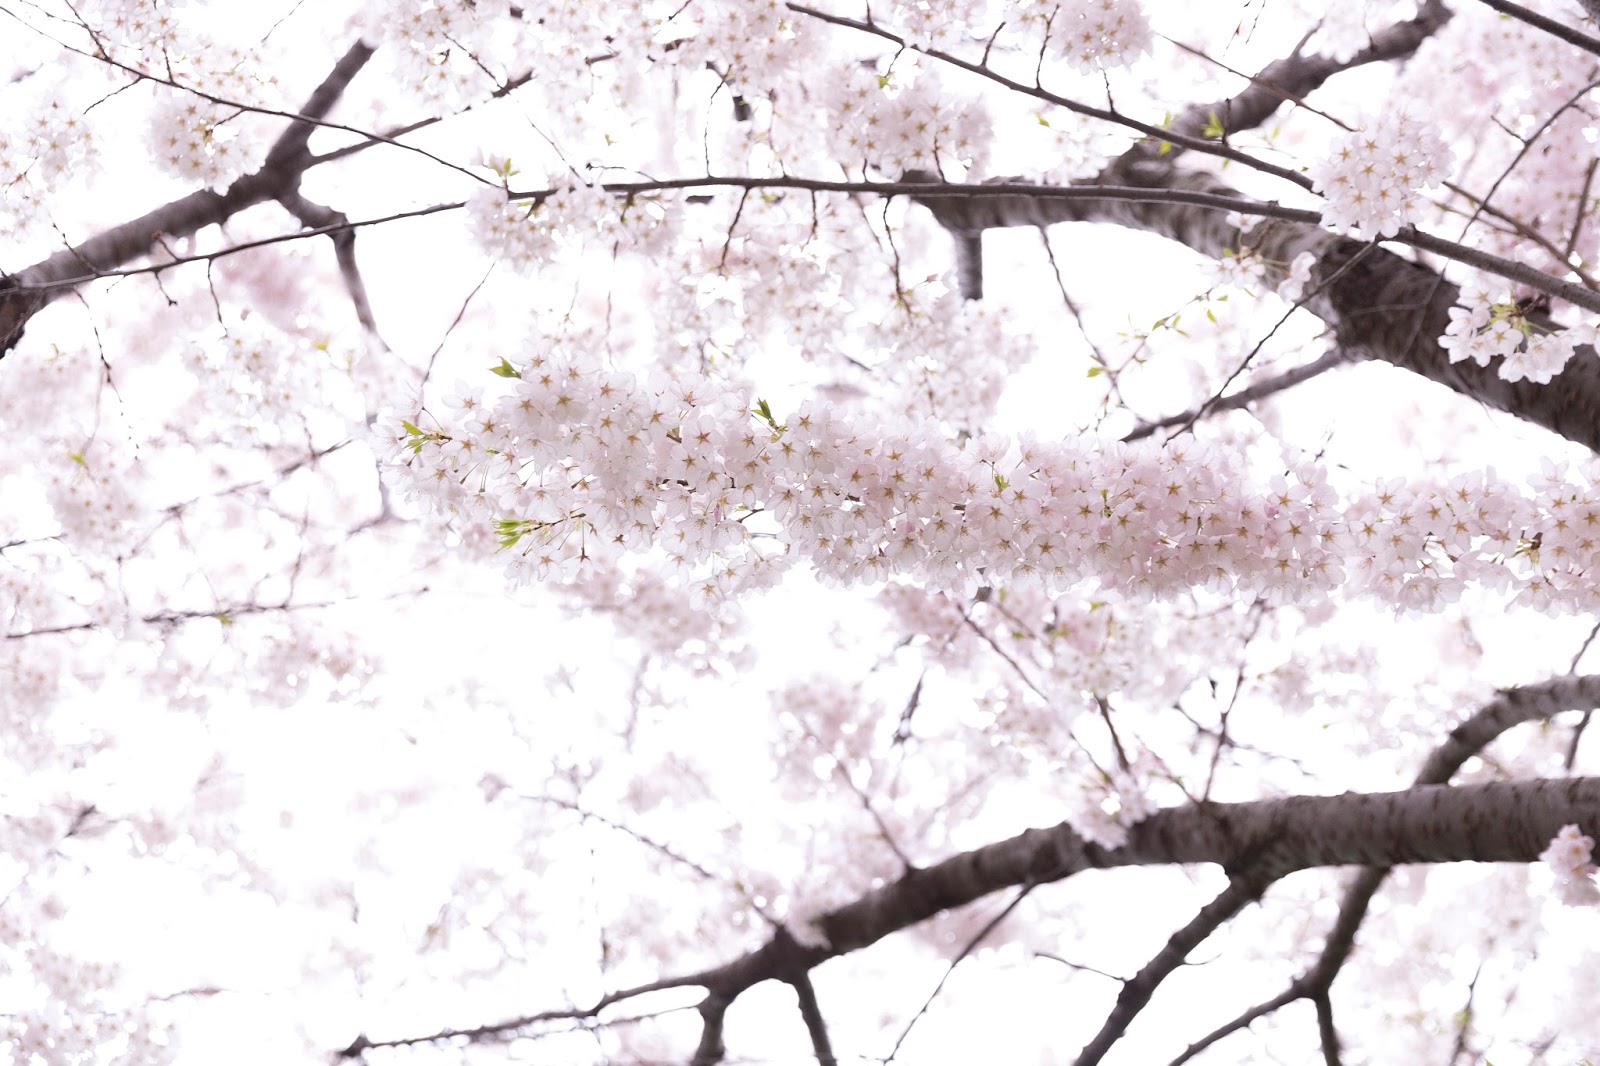 Under the Cherry Blossoms - Krystin Lee